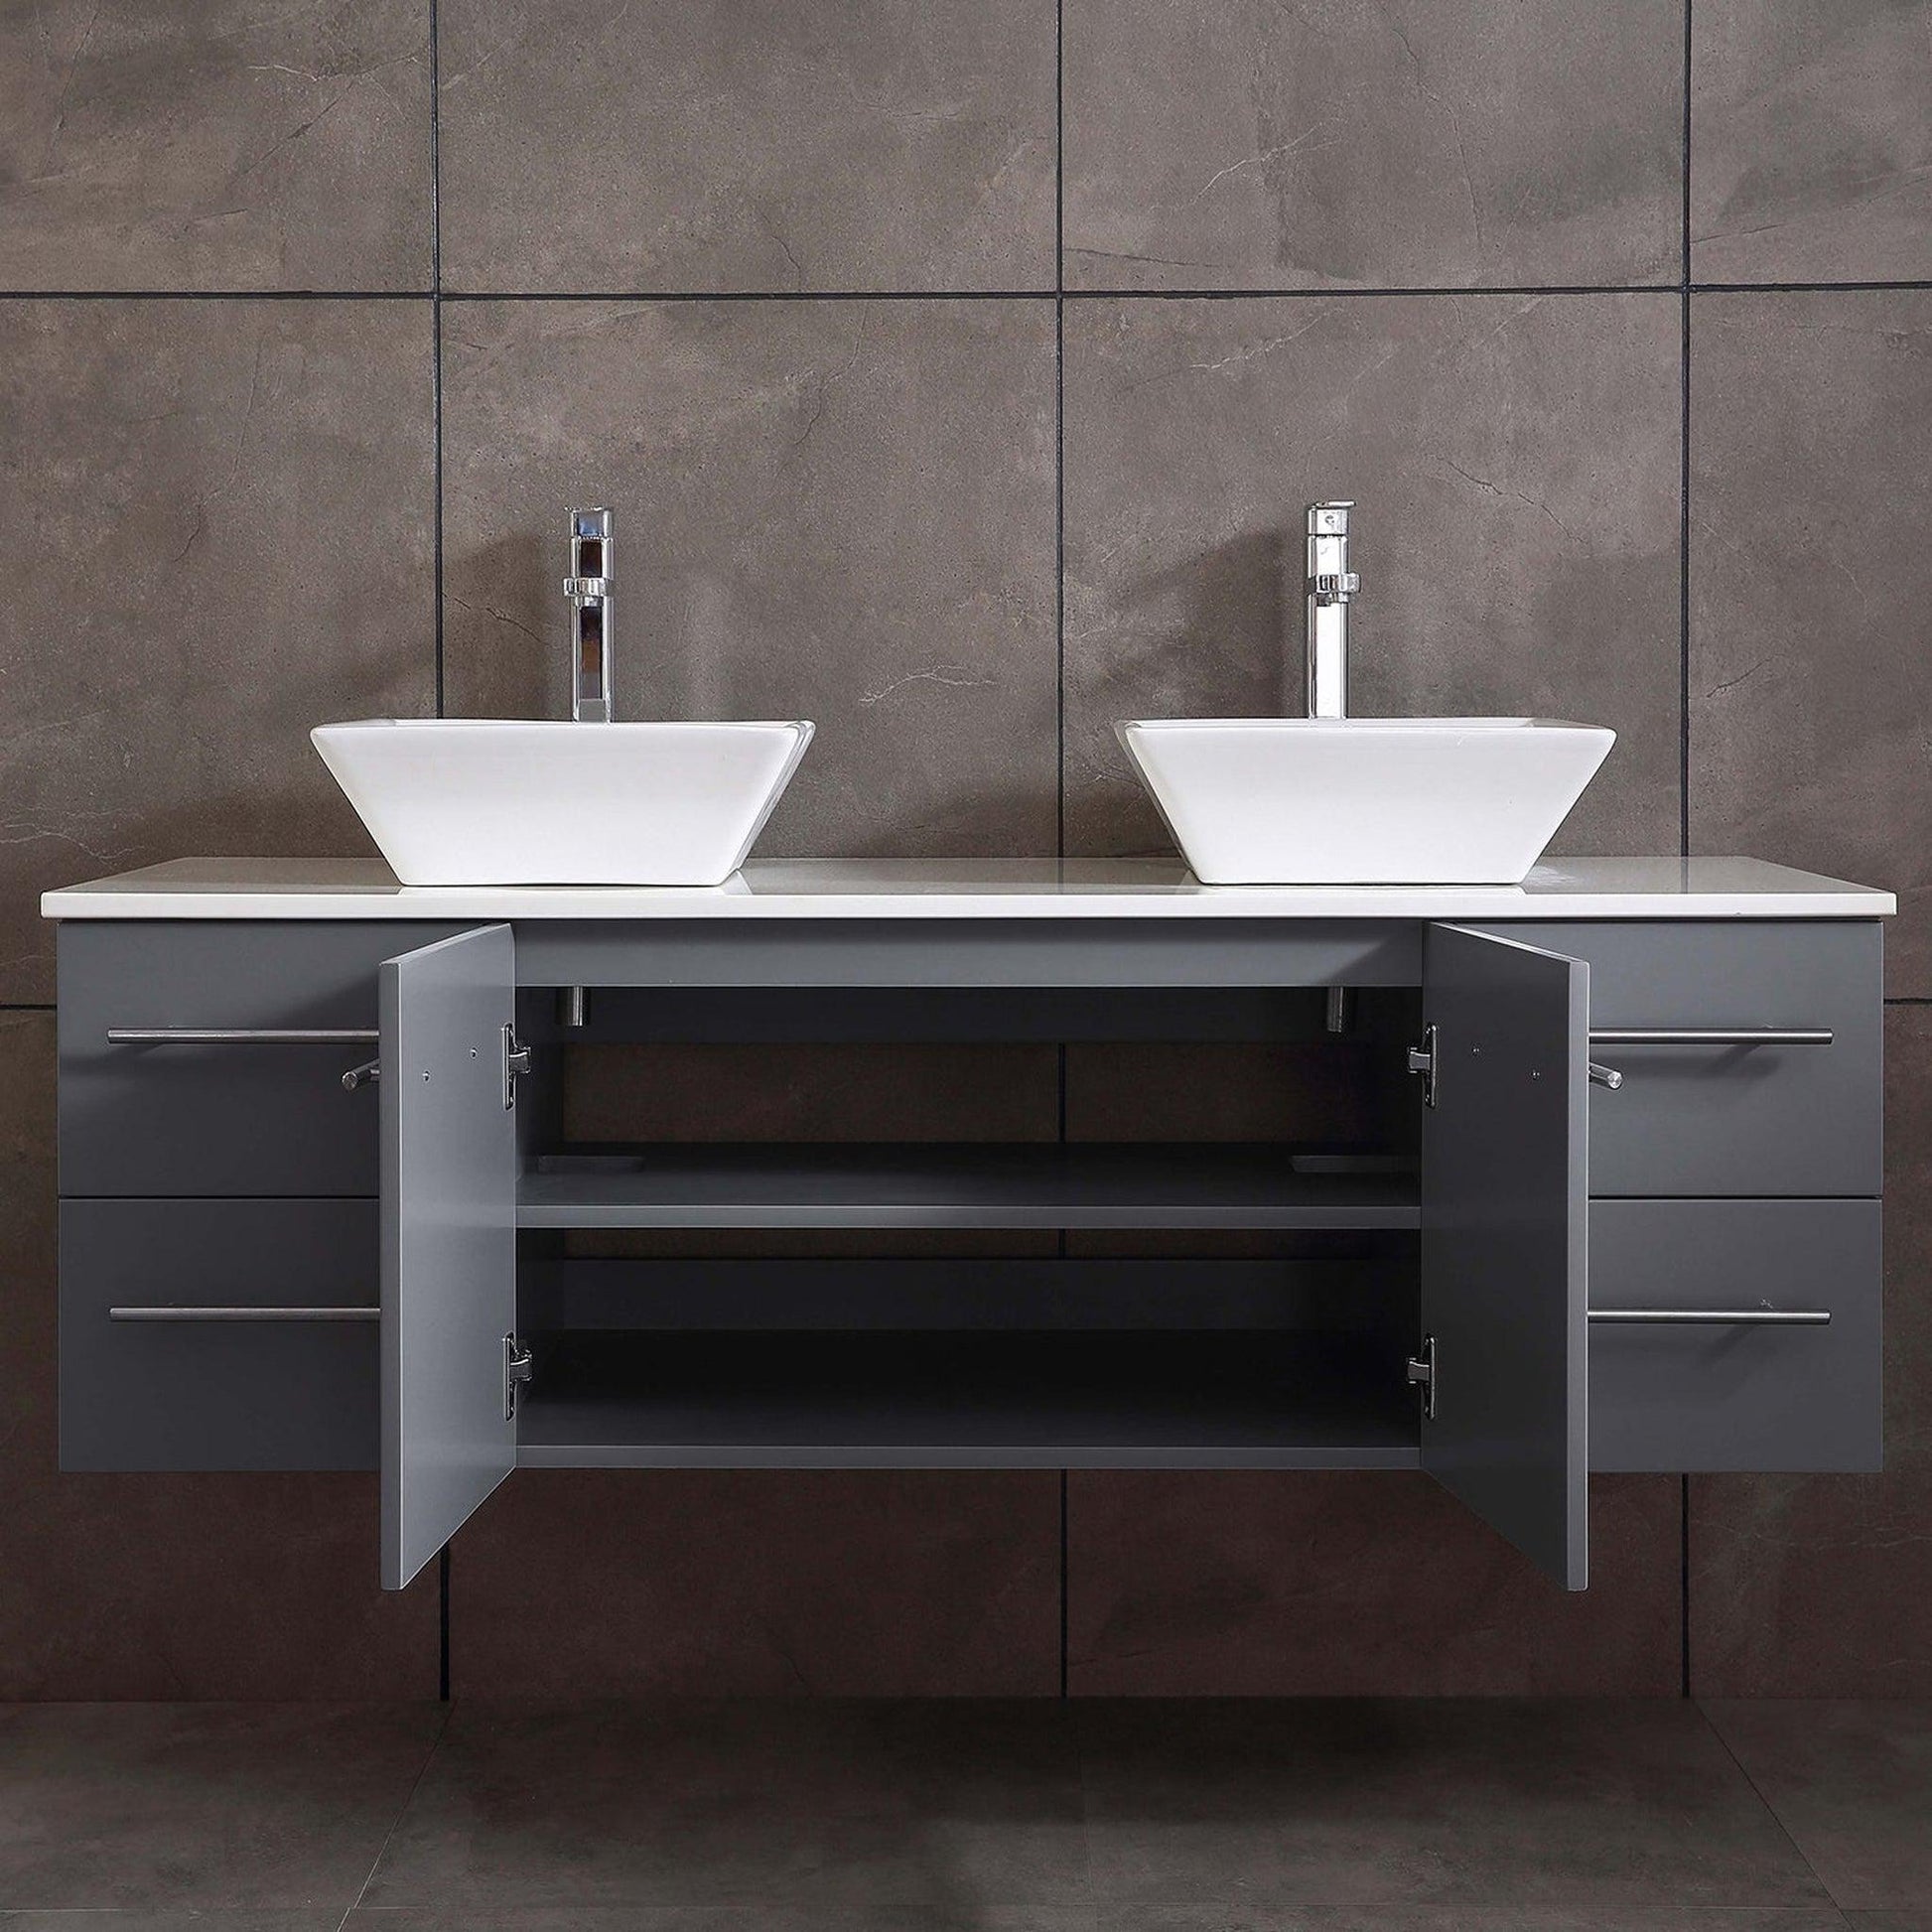 Eviva Totti Wave 60" x 16" Gray Wall-Mounted Bathroom Vanity With White Man-Made Stone Countertop and Porcelain Vessel Sink